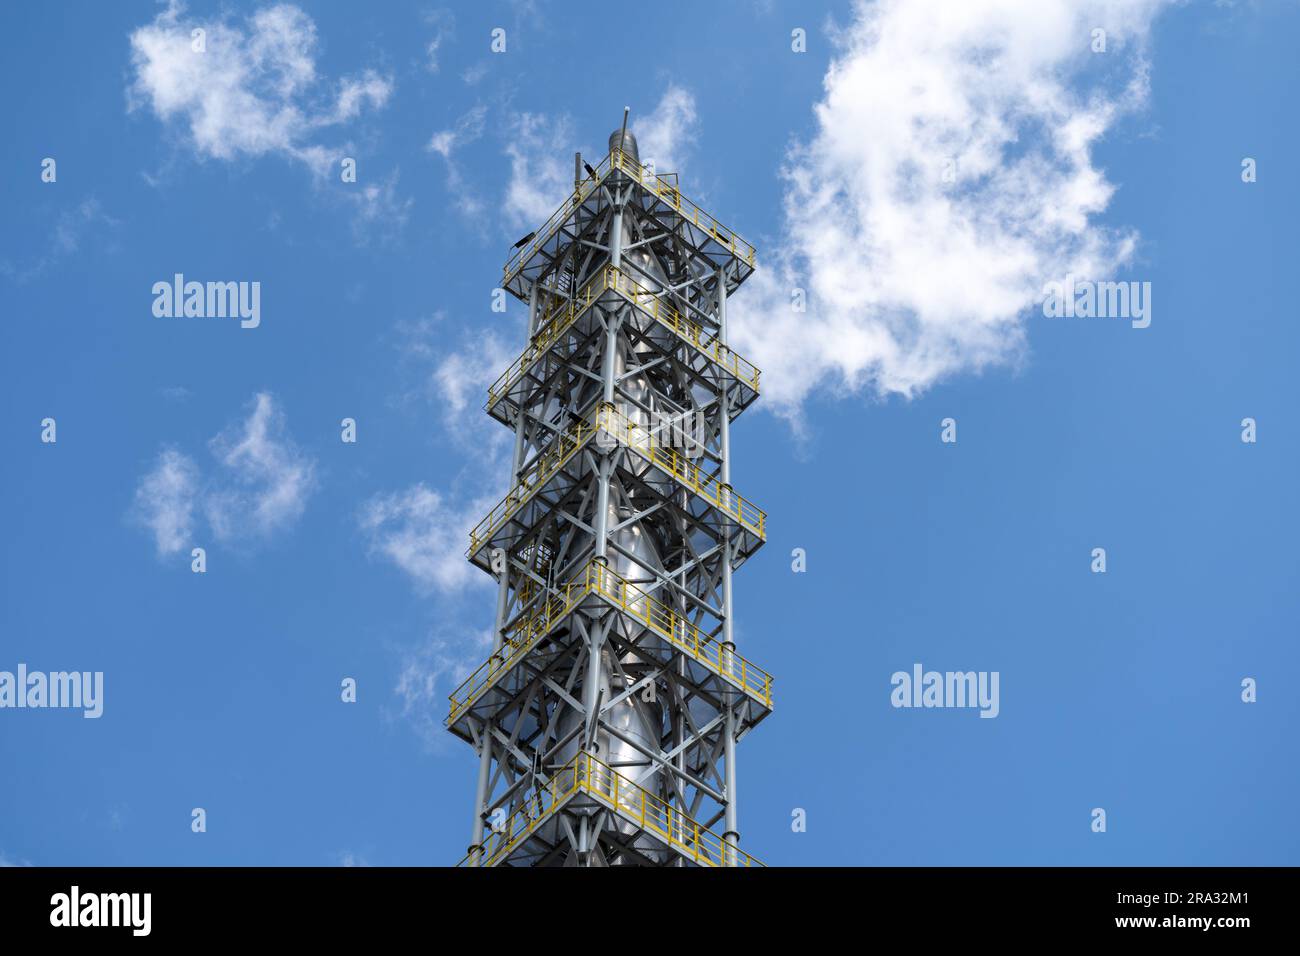 Oil refinery tower. Petroleum plant factory building. Big industrial zone equipment. Stock Photo